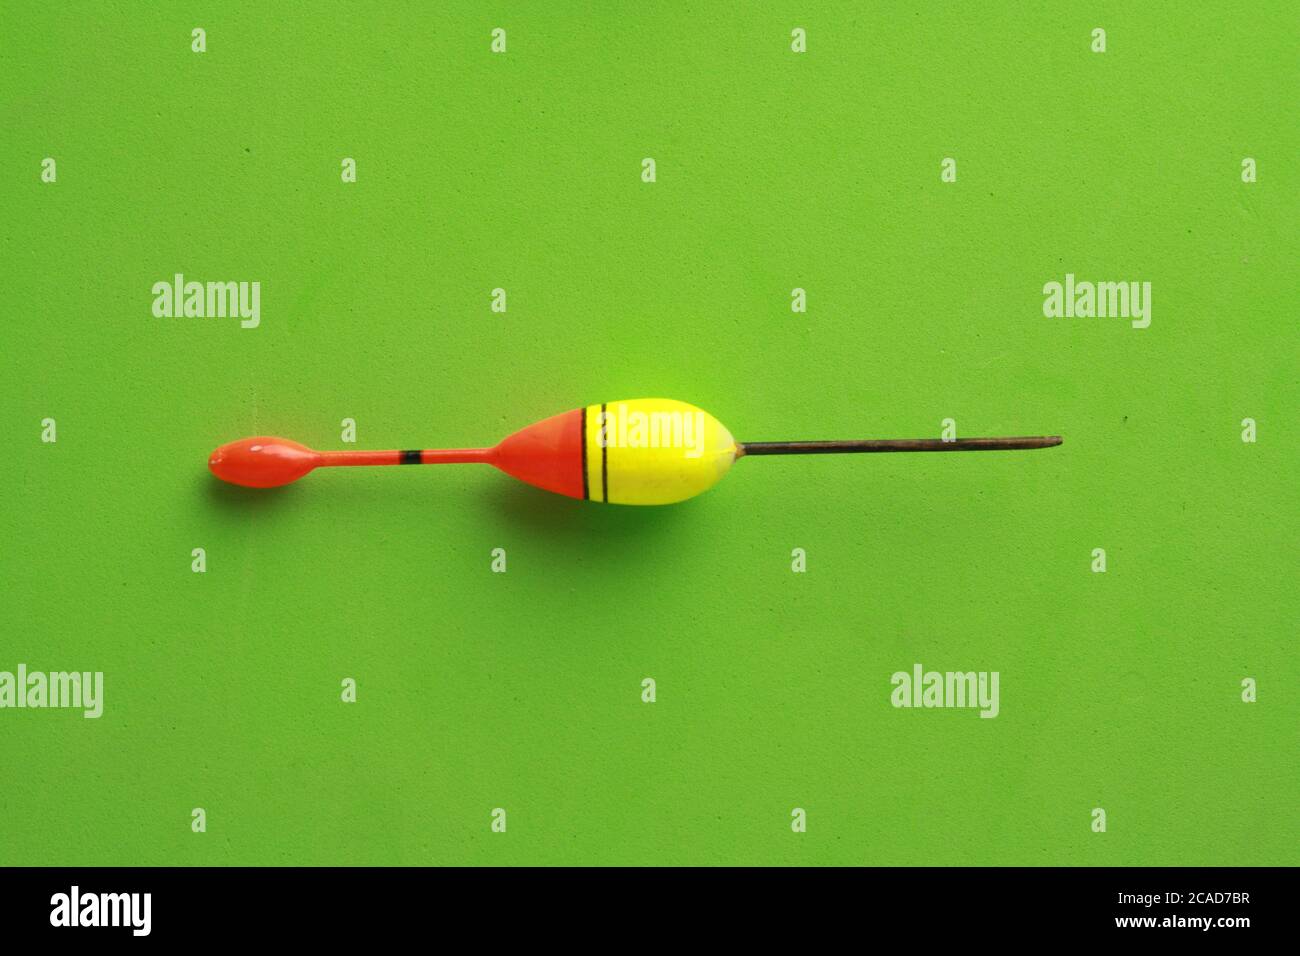 Top view of a colorful fishing rod bobber on a green background Stock Photo  - Alamy